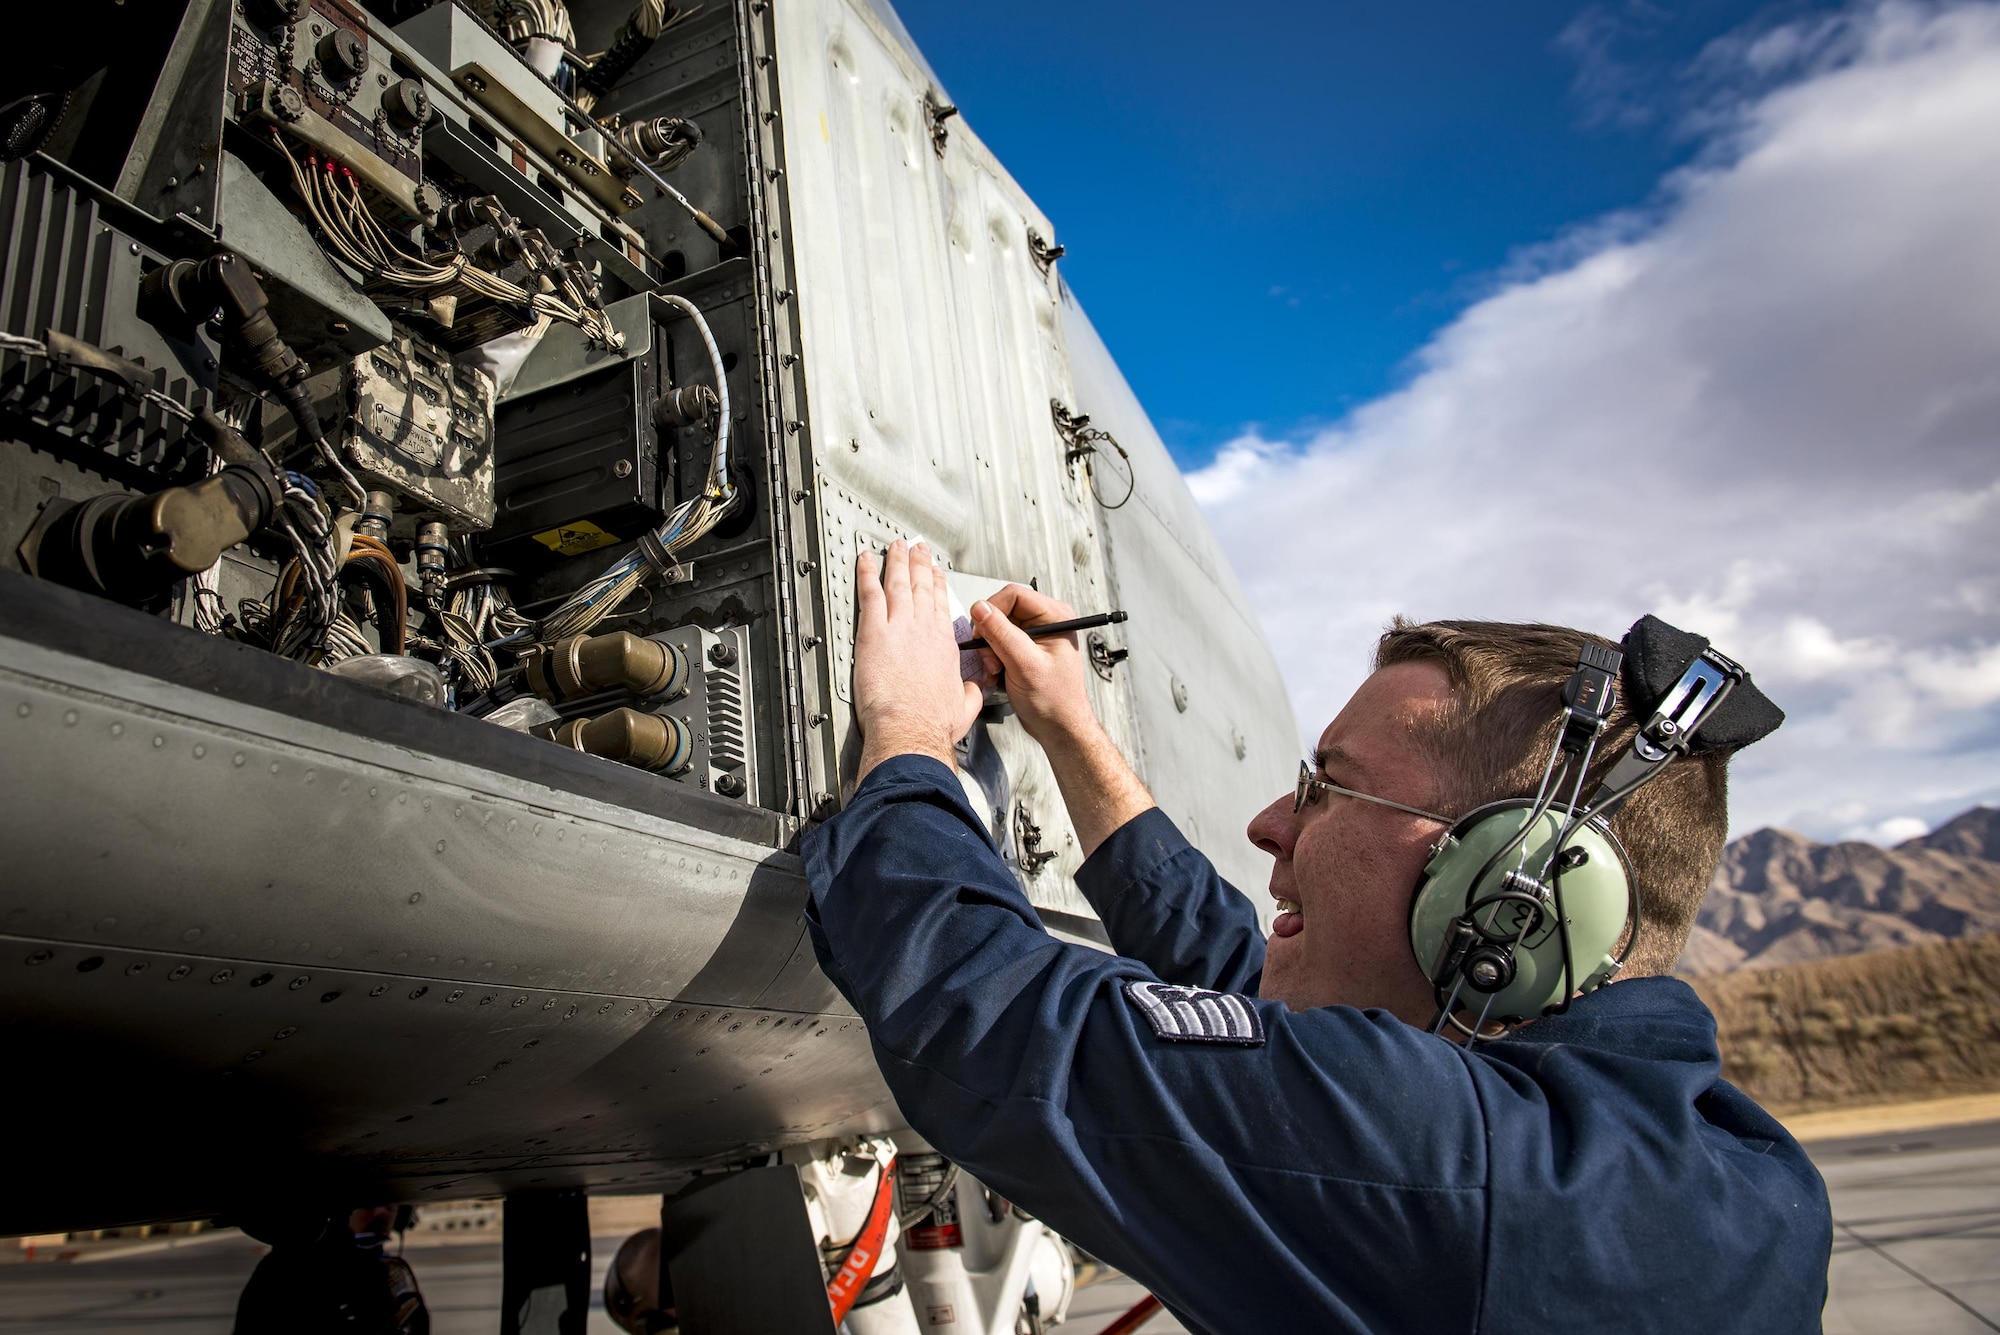 Staff Sgt. Ryan Holovich, 74th Aircraft Maintenance Unit crew chief, conducts a post-flight inspection on an A-10C Thunderbolt II during Green Flag-West 17-03, Jan. 23, 2017, at Nellis Air Force Base, Nev. GFW is an air-land integration combat training exercise, which hosted 12 A-10s from Moody Air Force Base, Ga. Accompanying the aircraft were 130 maintenance personnel who worked around the clock to launch 18 sorties per day. (U.S. Air Force photo by Staff Sgt. Ryan Callaghan)